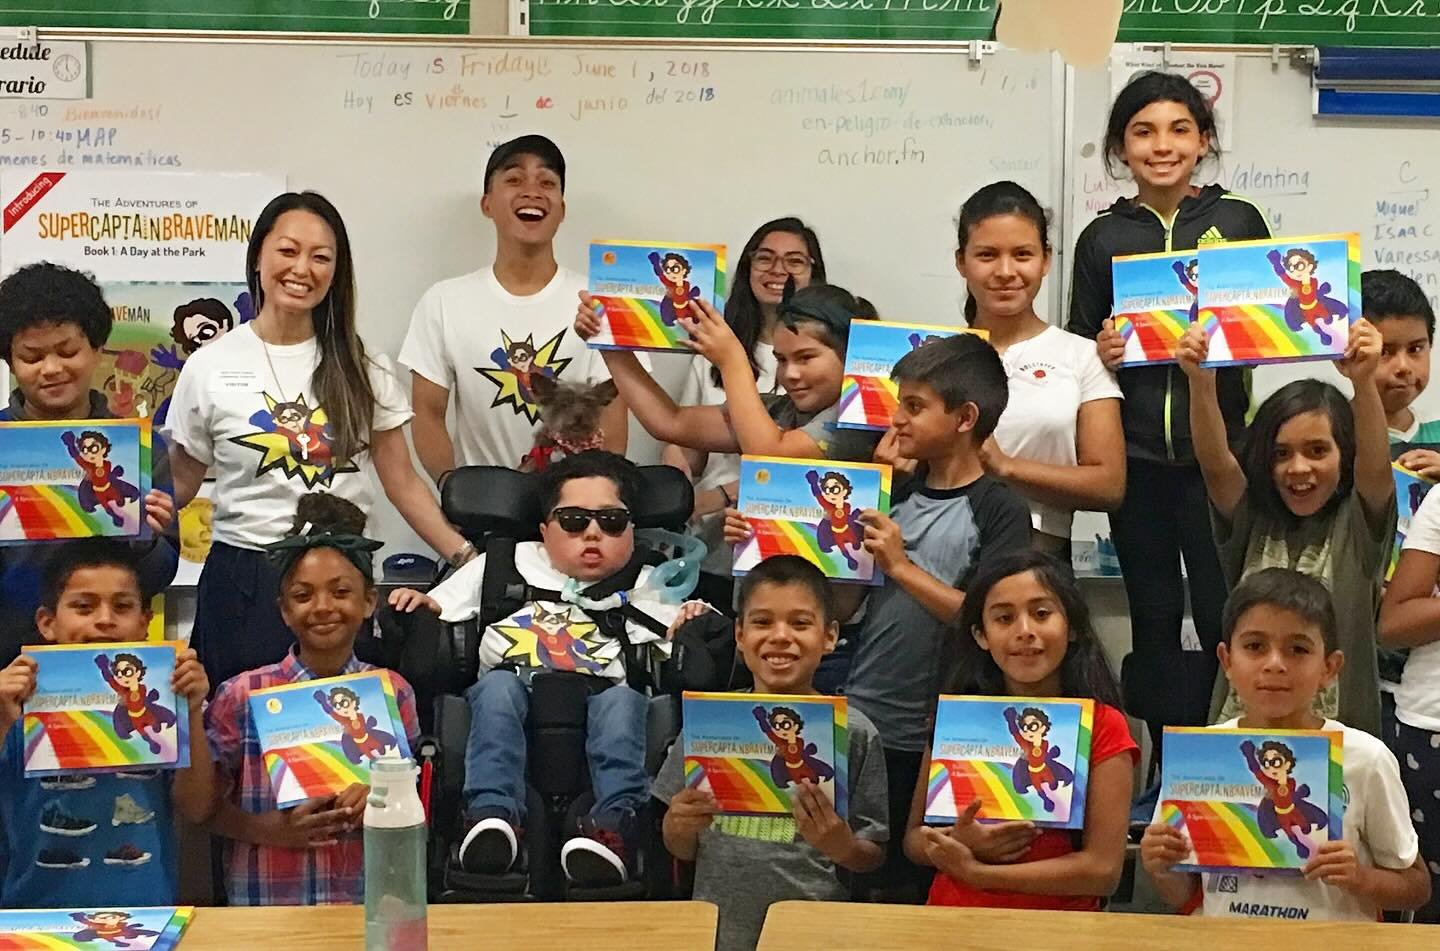 When you share stories, you share smiles! 📚

We love reading SuperCaptainBraveMan stories to classes! 

#SuperCaptainBraveMan #disability #kidsuperhero #childrensbook #childrensbooks #school #diversity